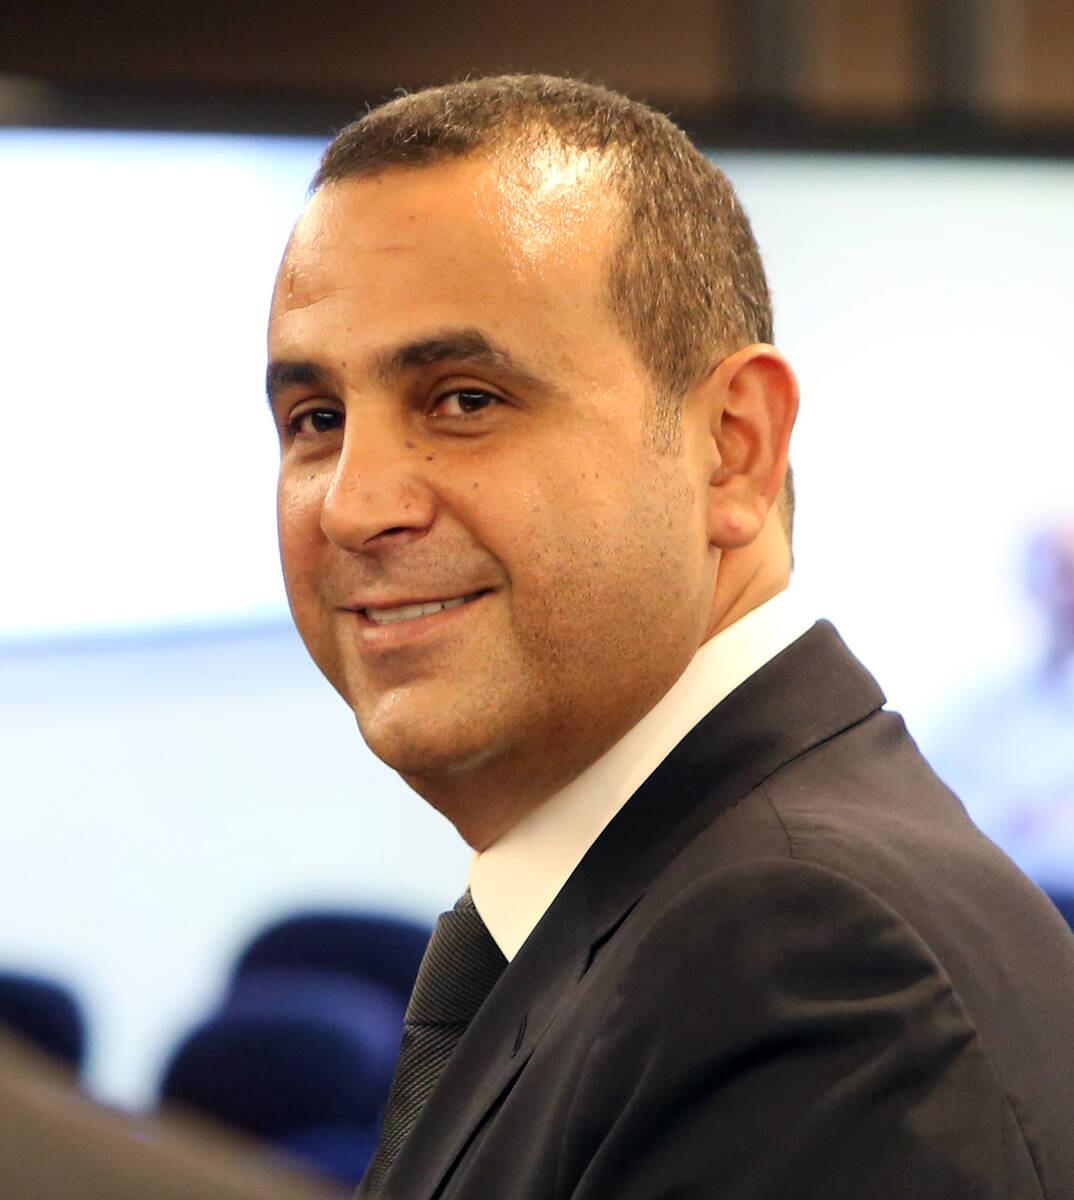 Sam Nazarian, CEO of SBE Entertainment, smiles after appeaing before the Nevada Gaming Commissi ...